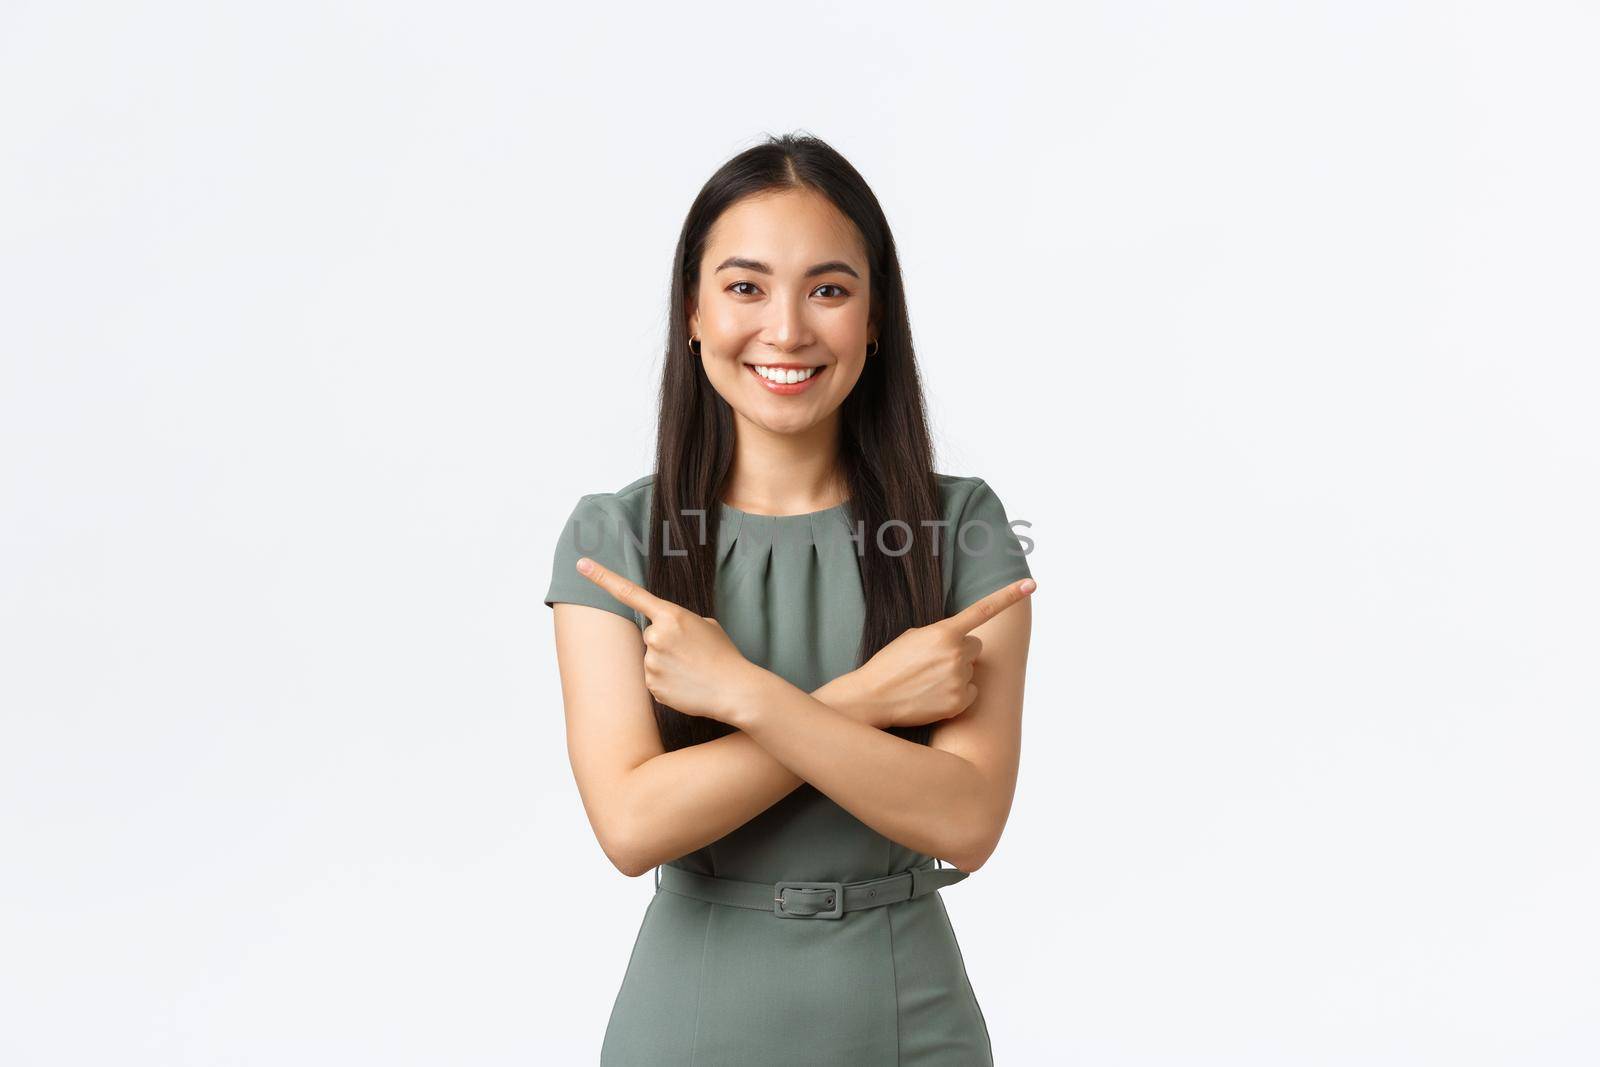 Small business owners, women entrepreneurs concept. Smiling pretty asian woman asking help with making decision, pointing fingers sideways, showing left and right product banners, white background.